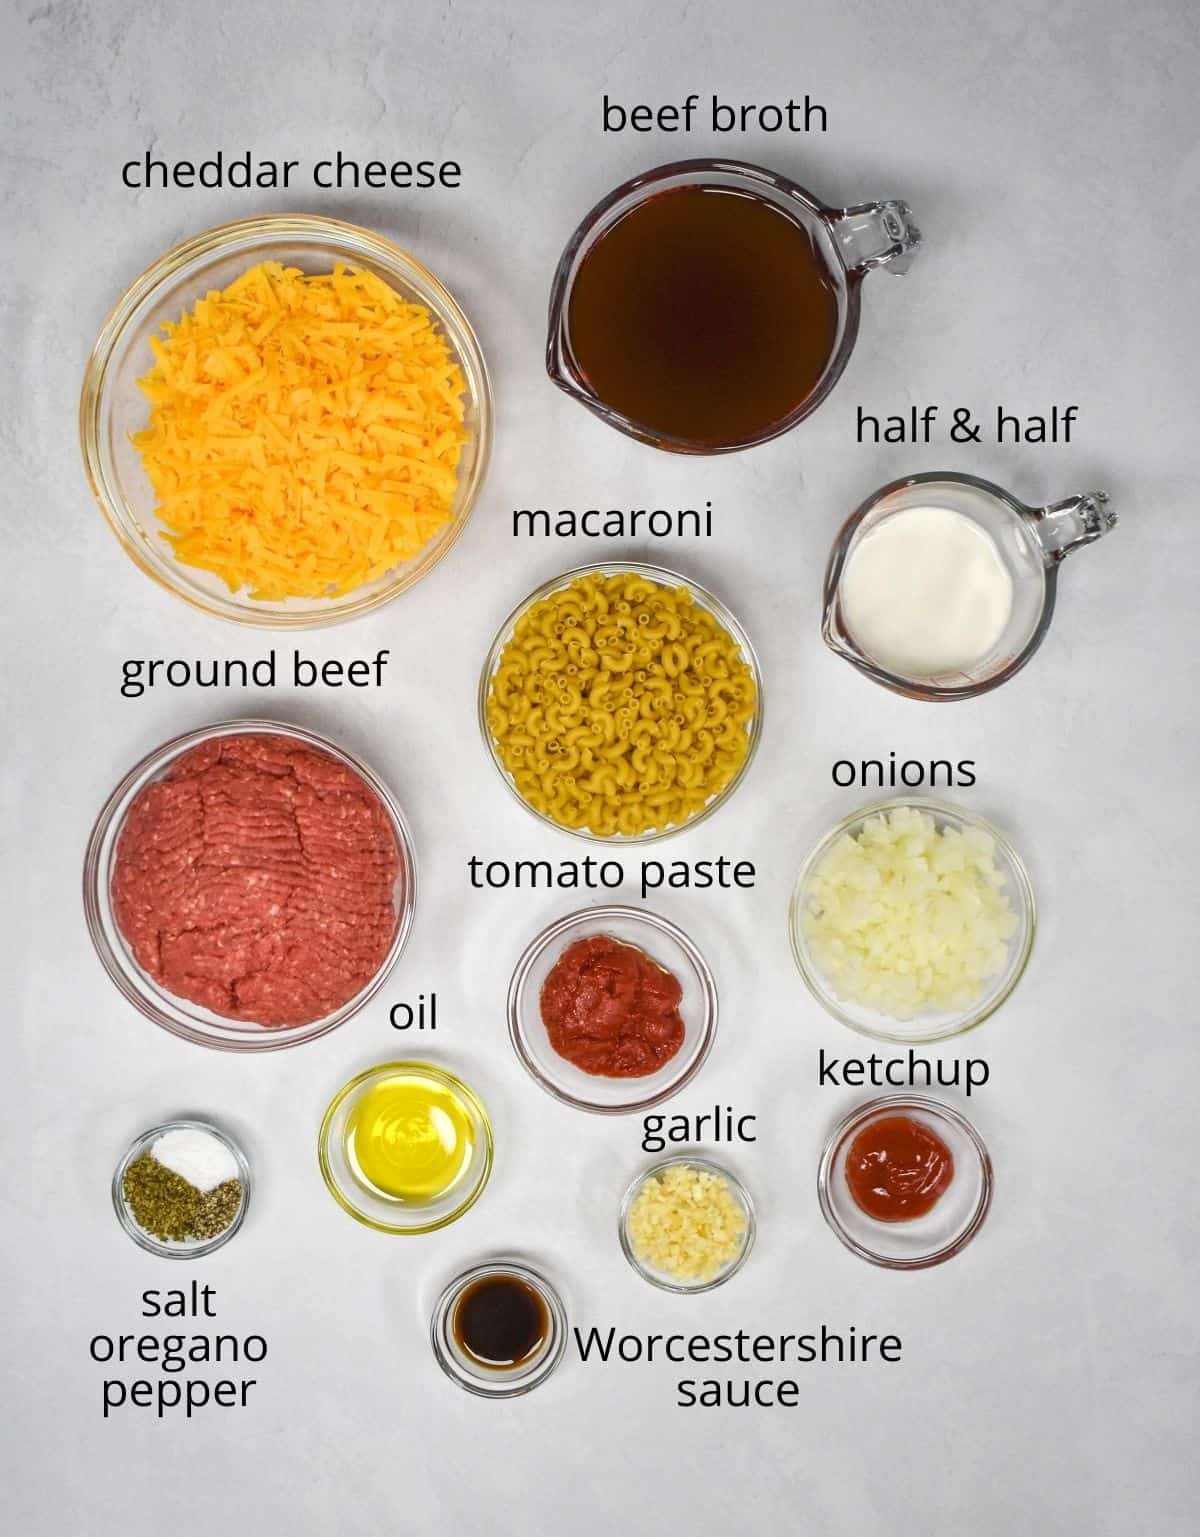 The ingredients for the dish prepped and arranged in glass bowls on a white table. Each ingredient has a label with the name above it in small black letters.